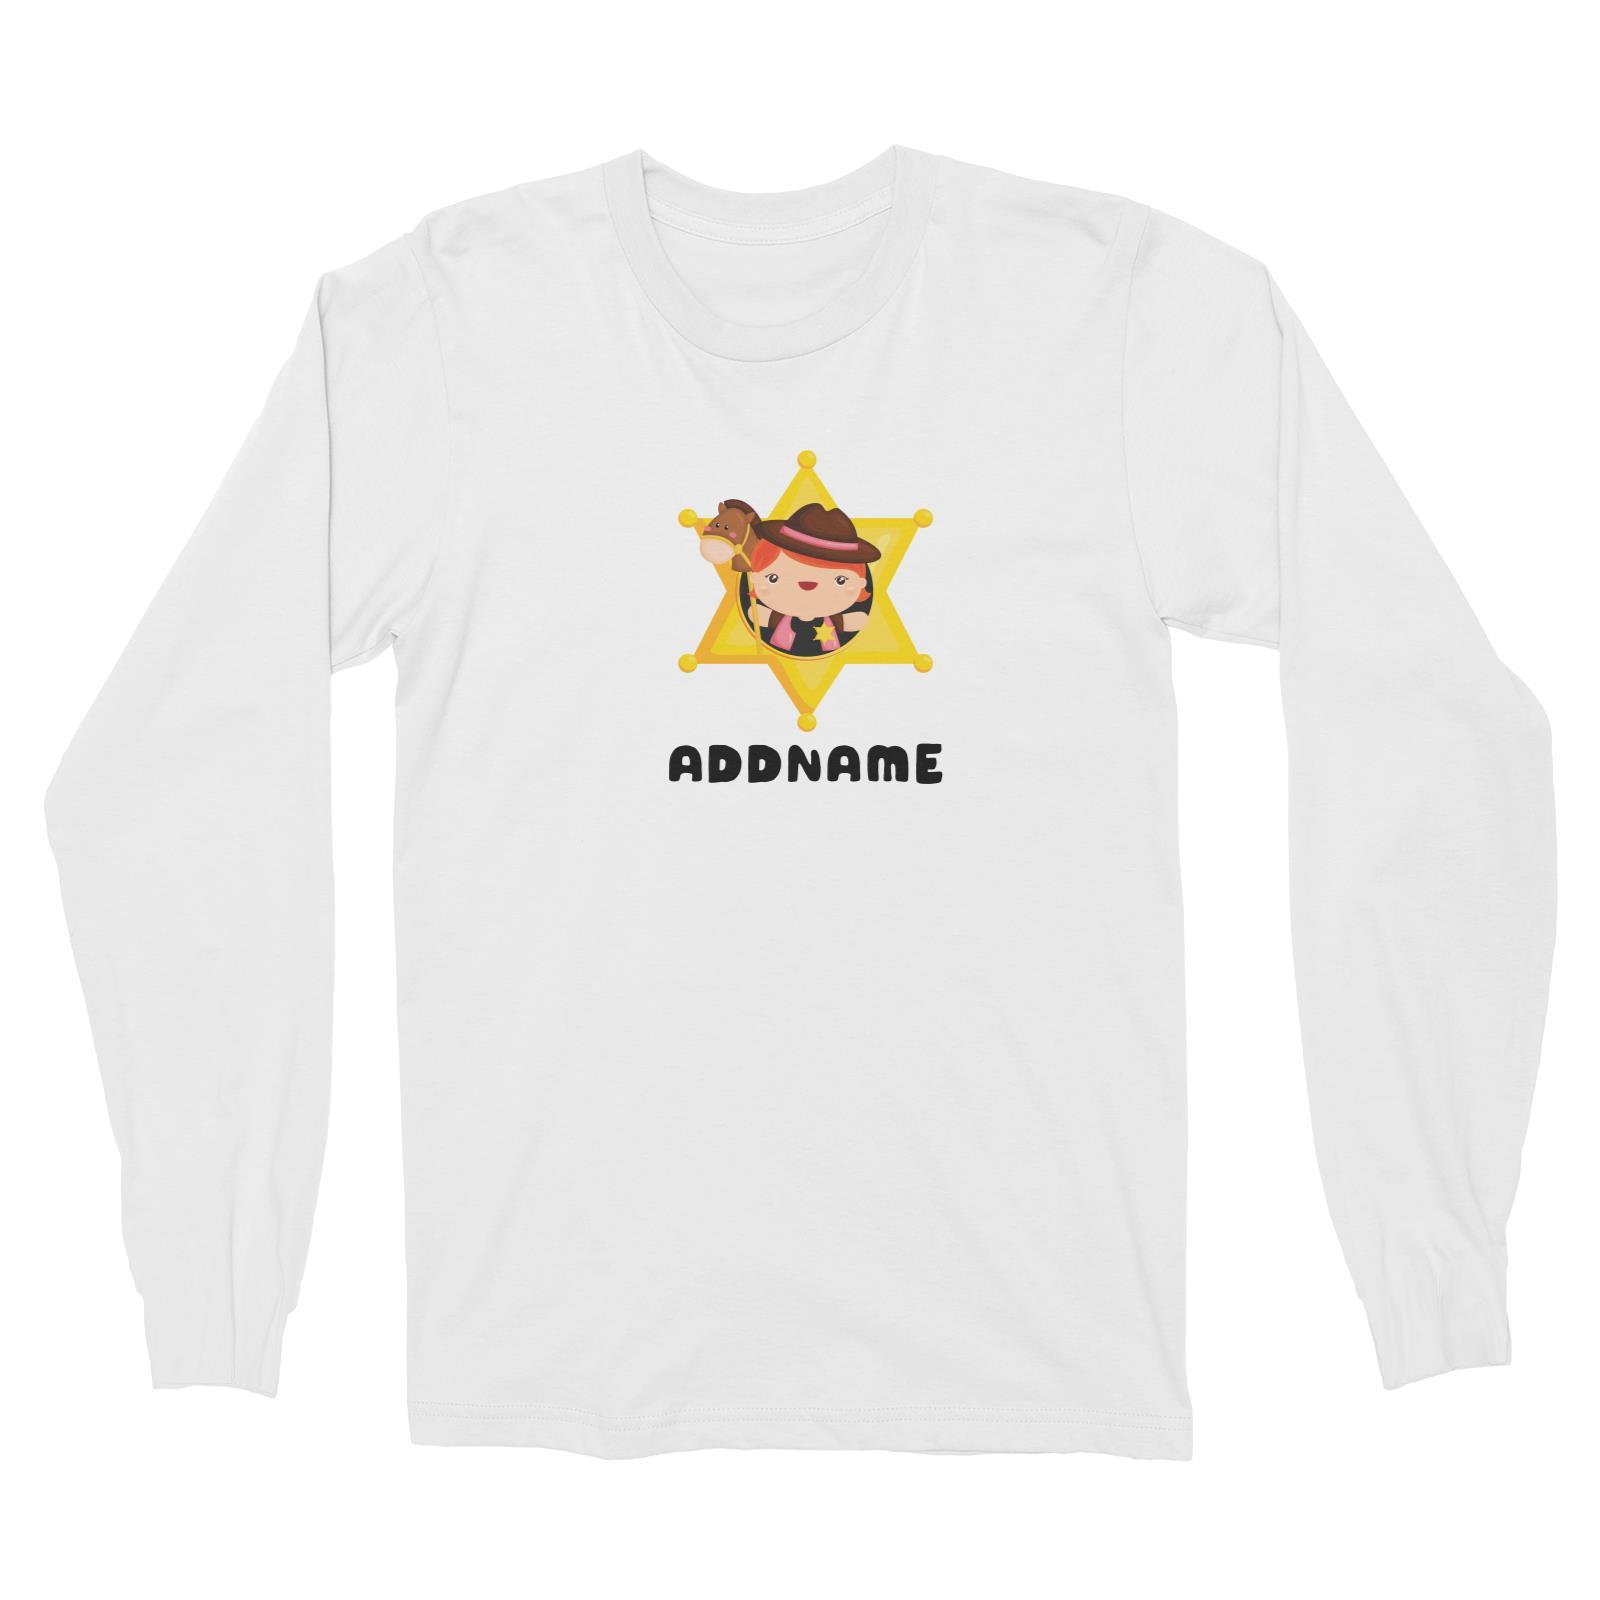 Birthday Cowboy Style Little Cowgirl Holding Toy Horse In Star Badge Addname Long Sleeve Unisex T-Shirt